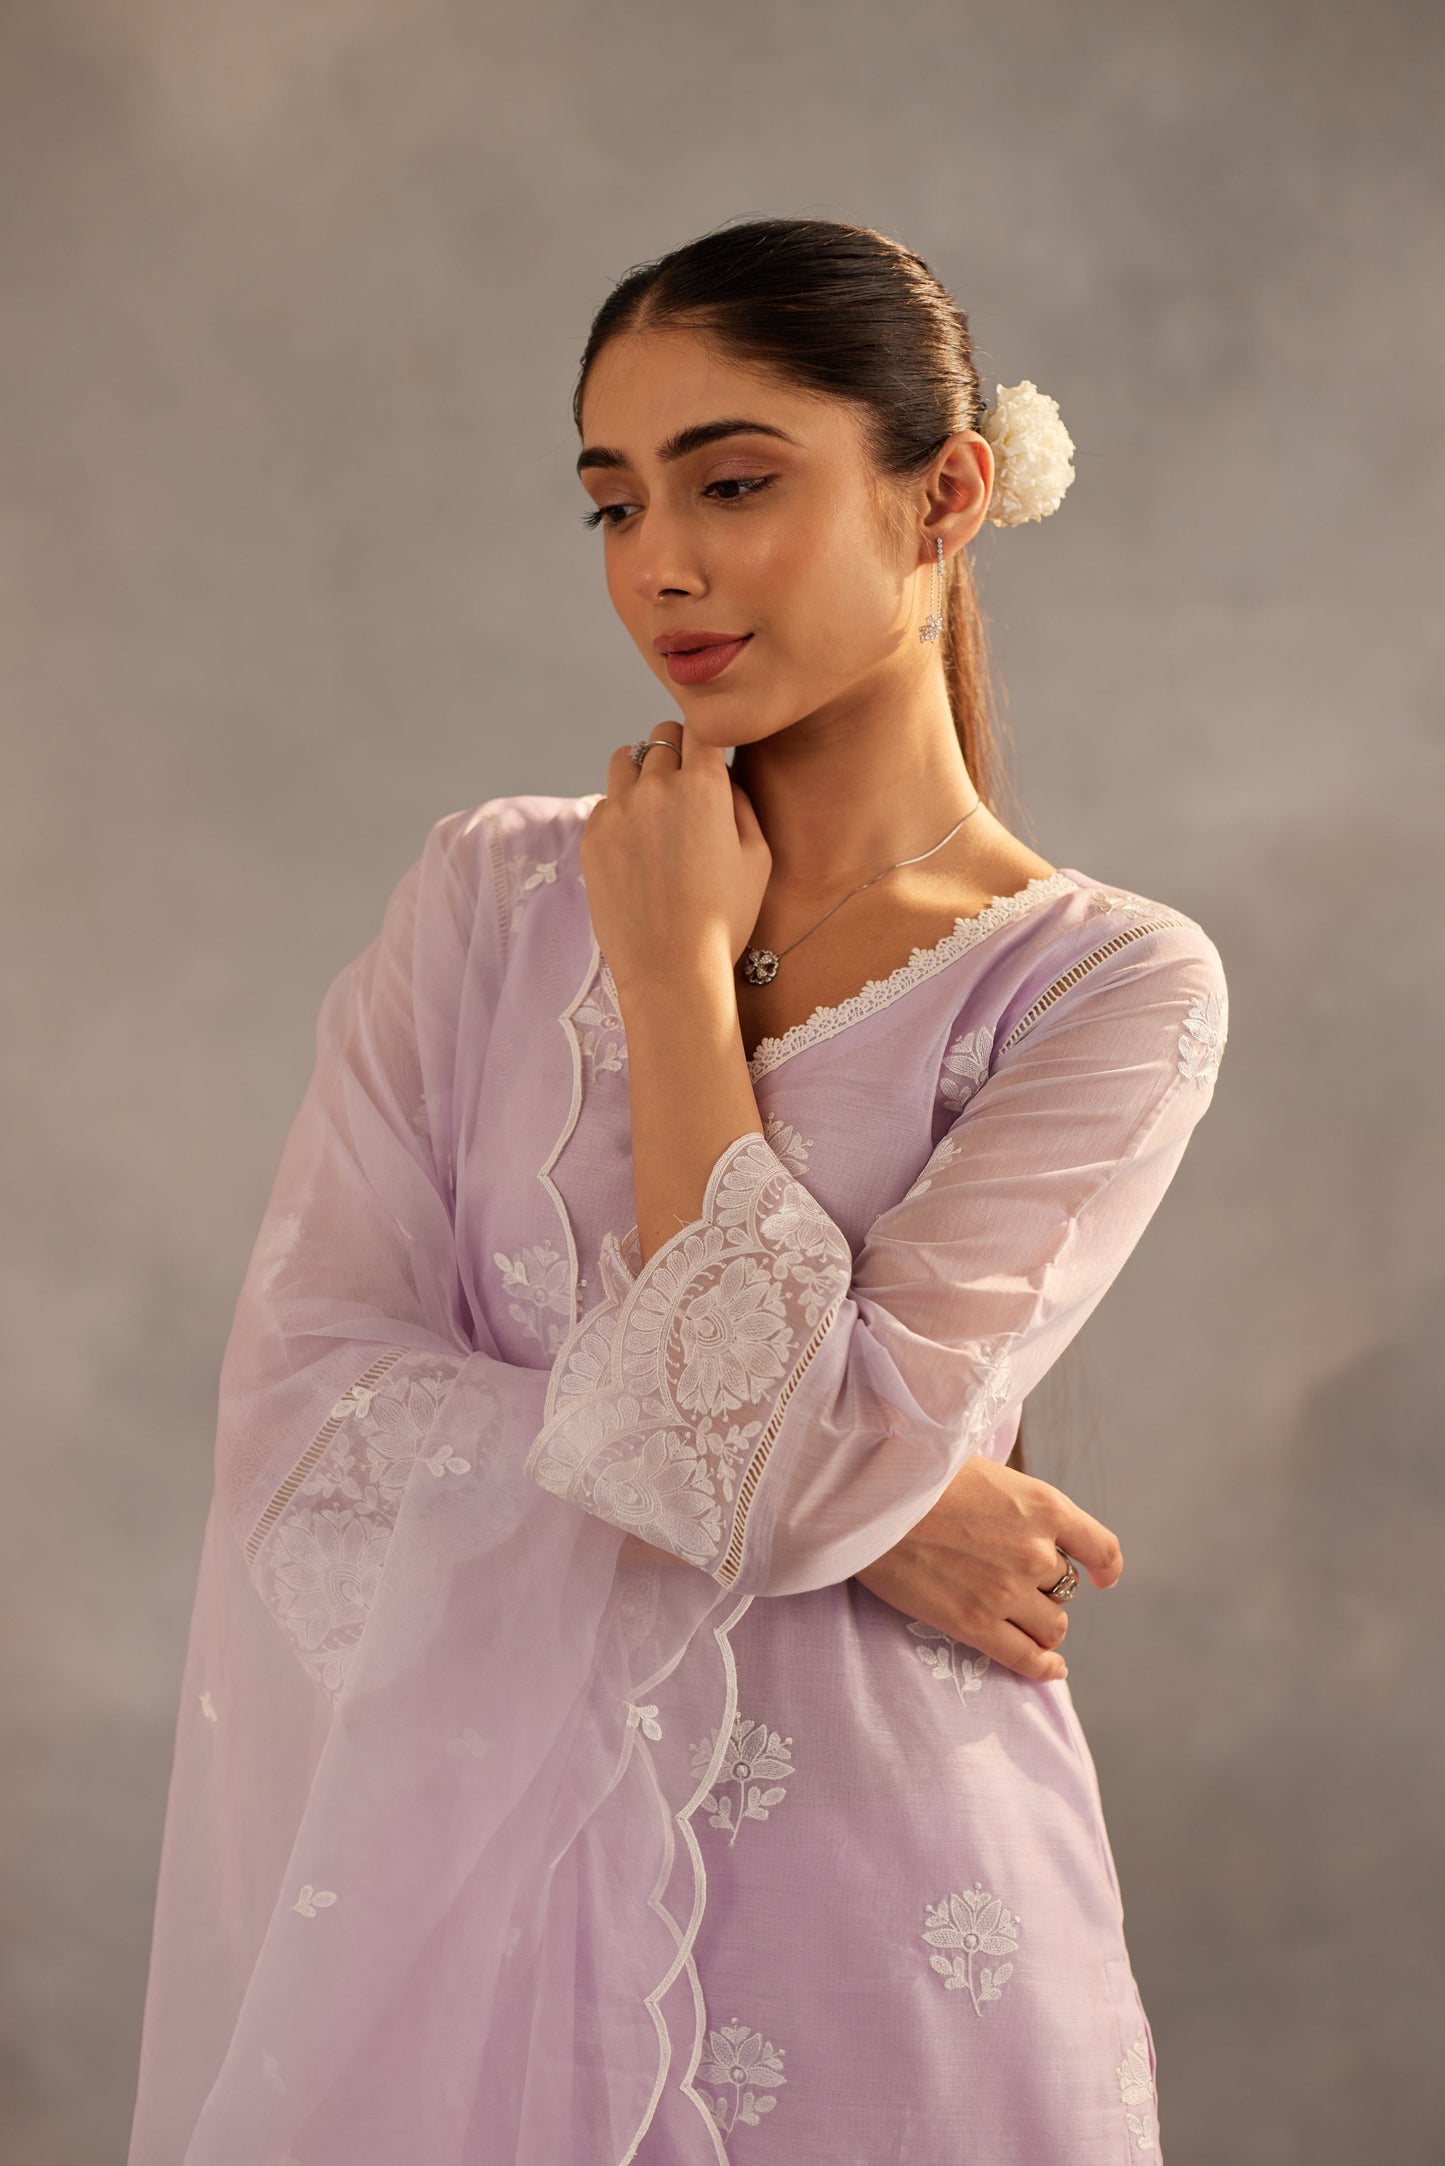 Mehak Jain in Gul - Lavender Embroidered Suit Set